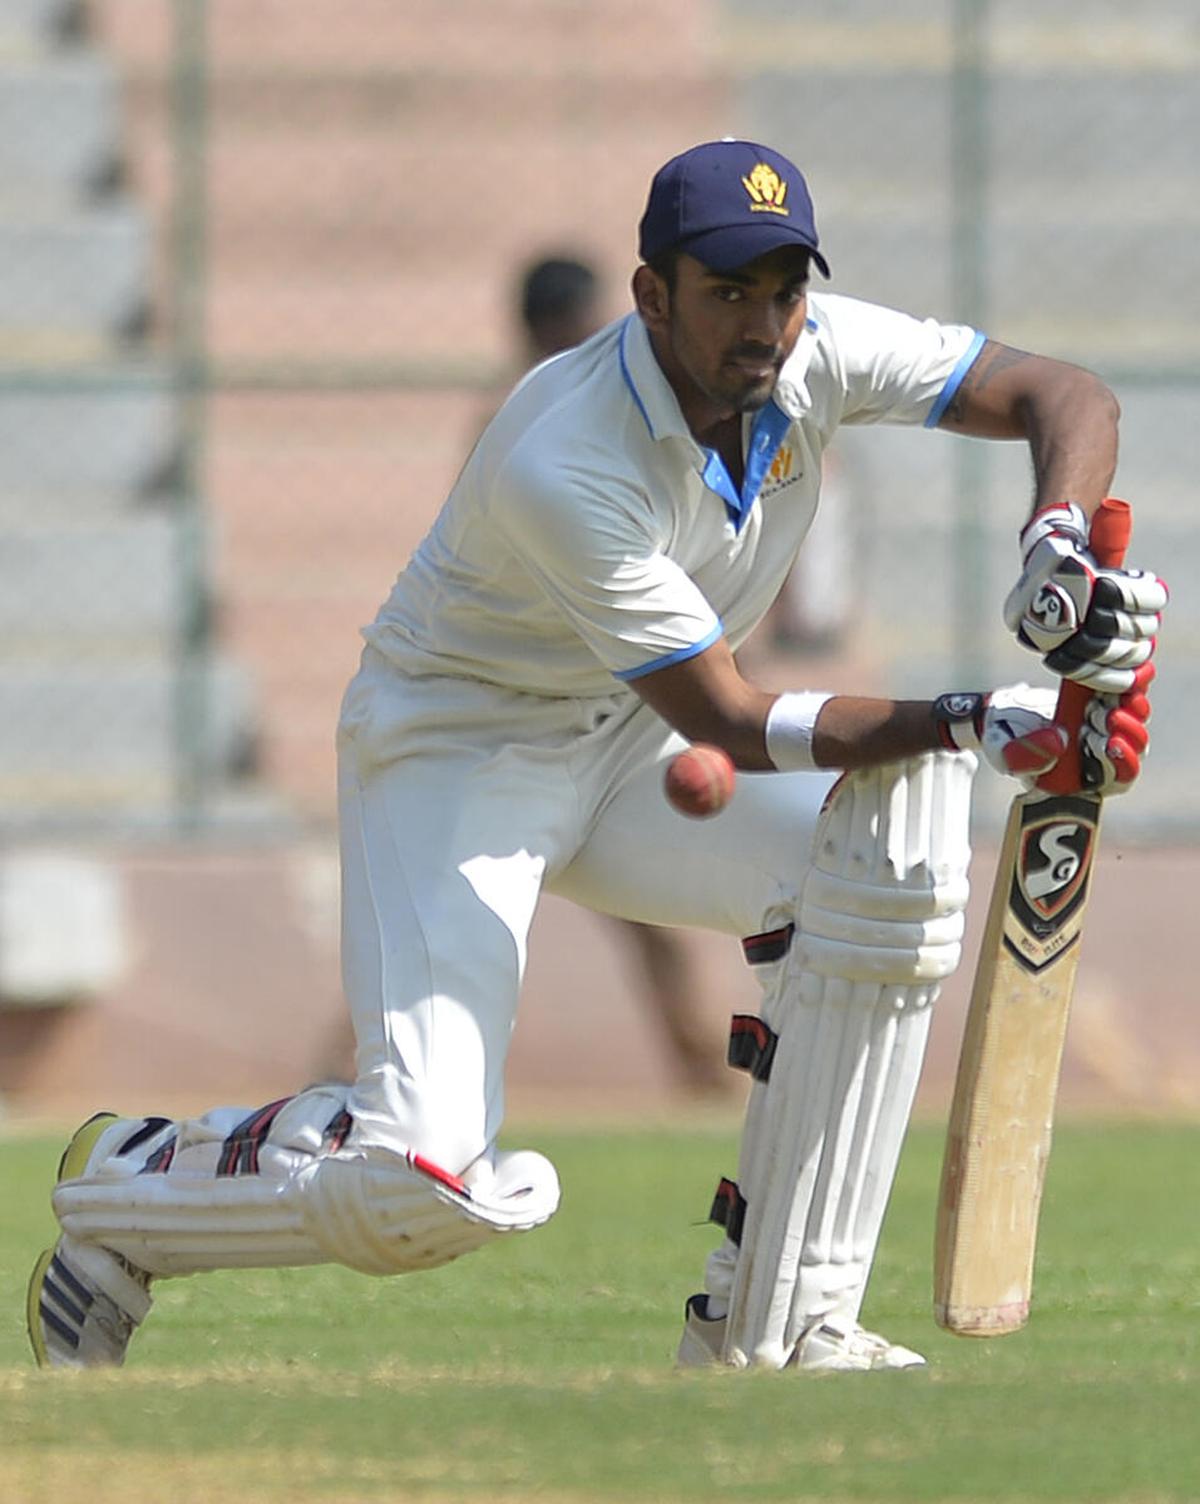 KL Rahul had a breakthrough season in 2013-14, playing a pivotal role in Karnataka’s Ranji Trophy triumph. He scored 1033 runs, featuring three centuries, three nineties, and delivered a standout performance in the final to earn the Man-of-the-Match award.